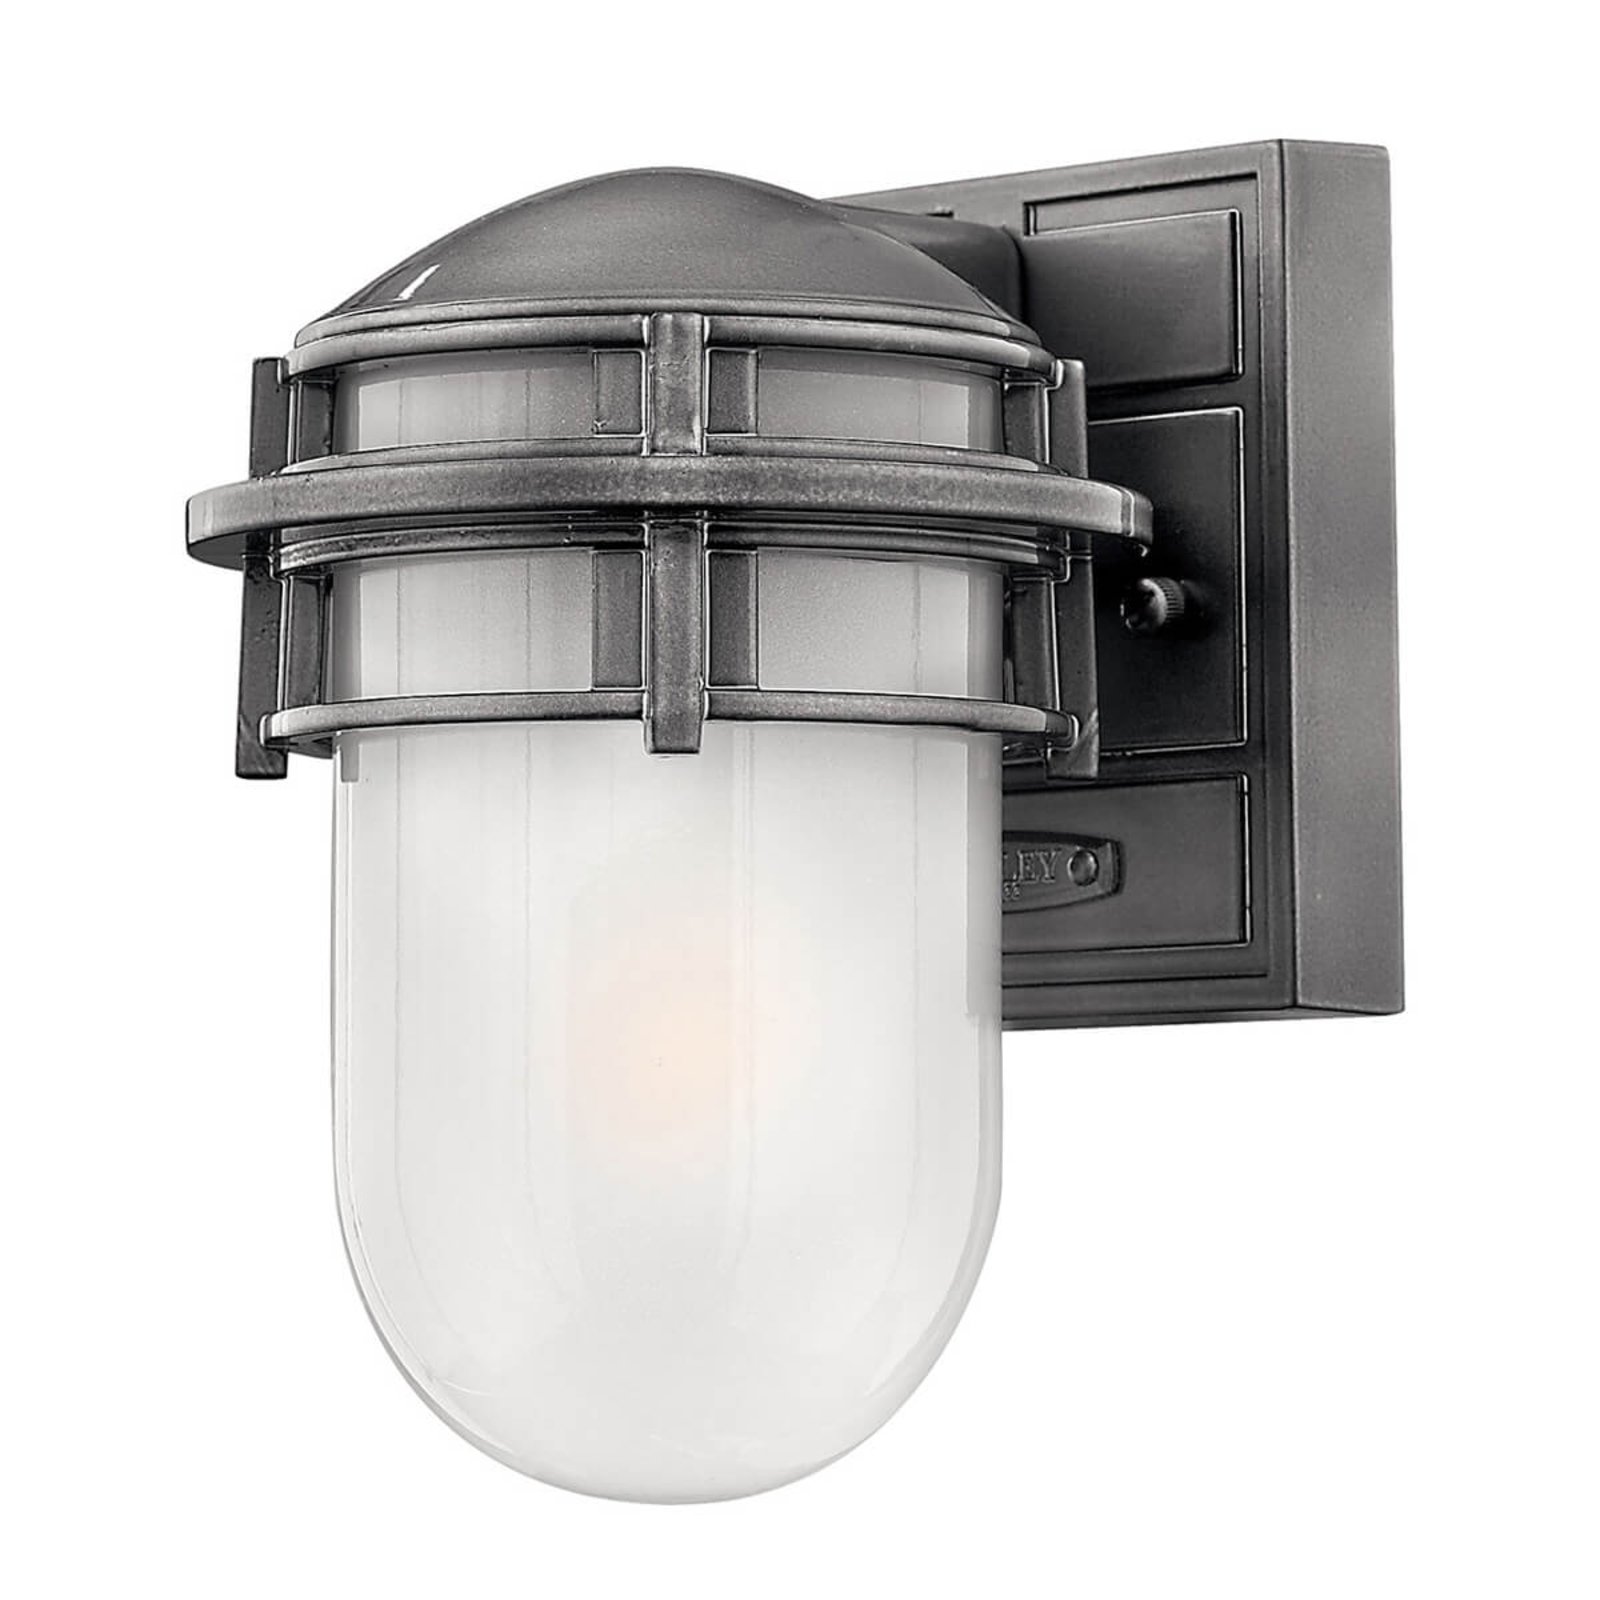 Reef - 20.3 cm tall wall light for outdoors